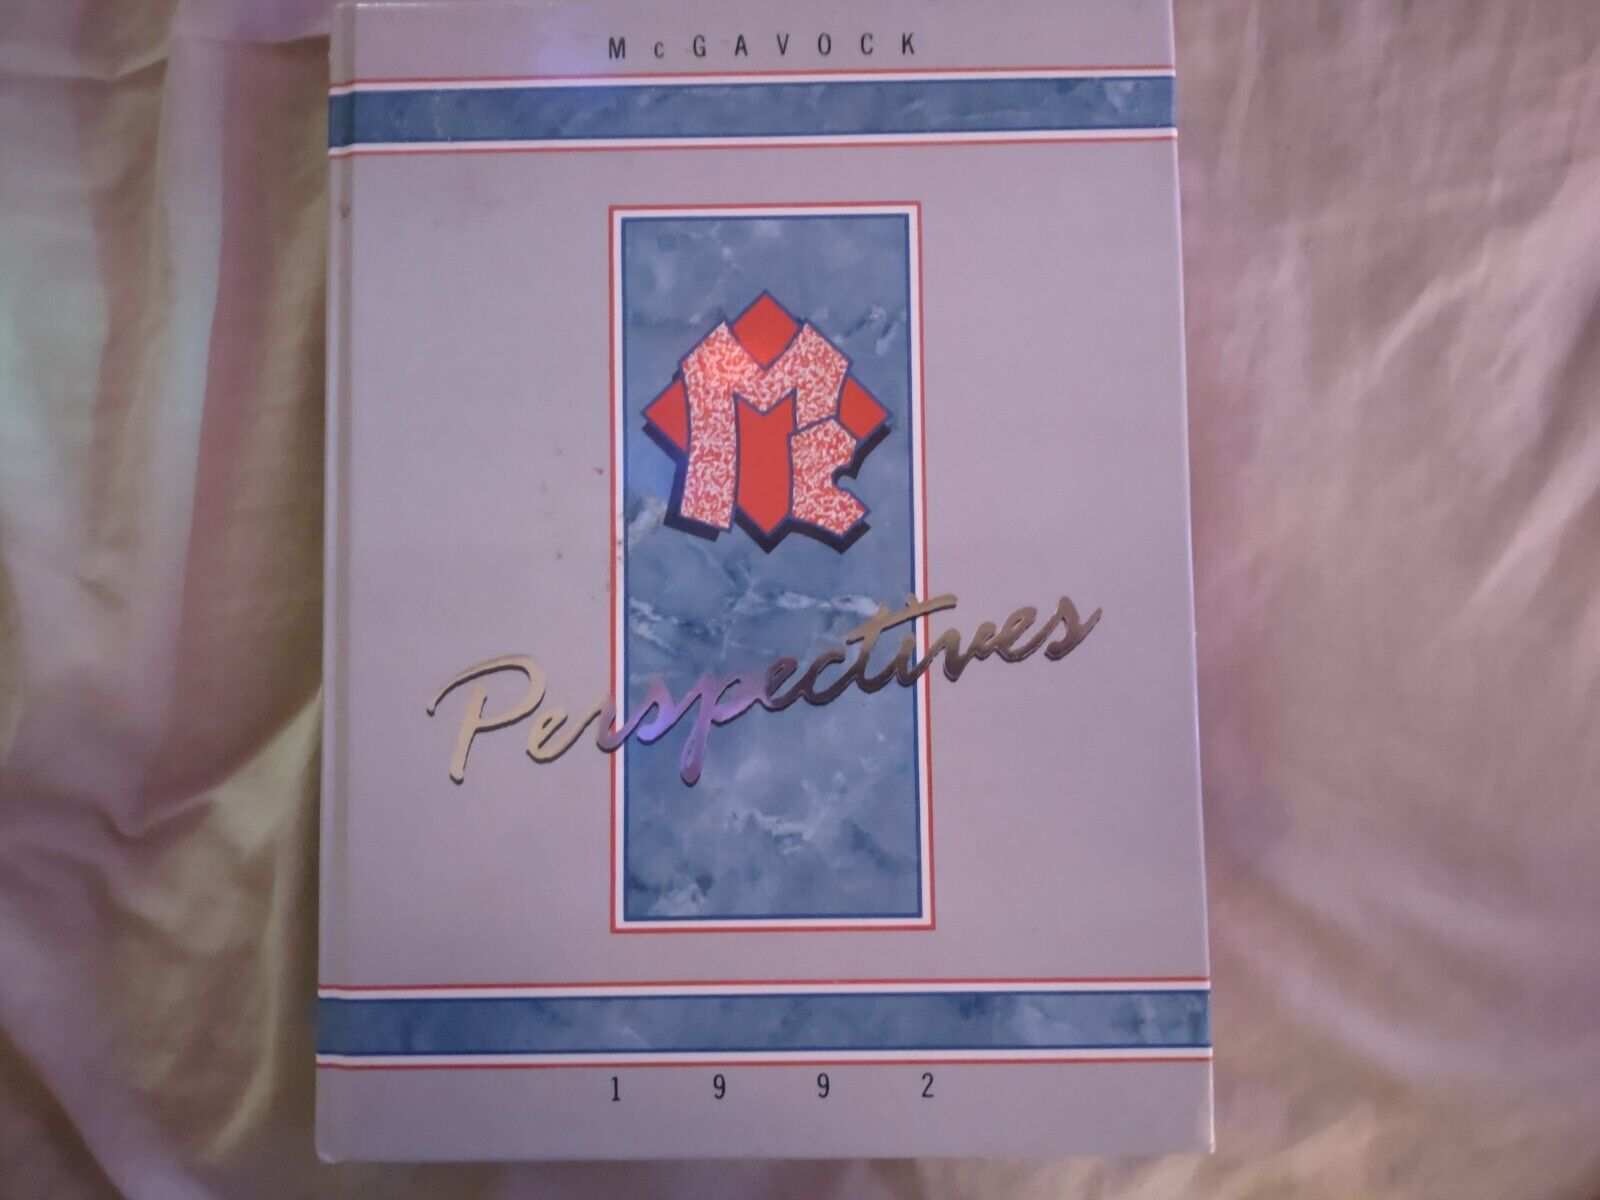 1992 mcgavock high school perspectives annual yearbook